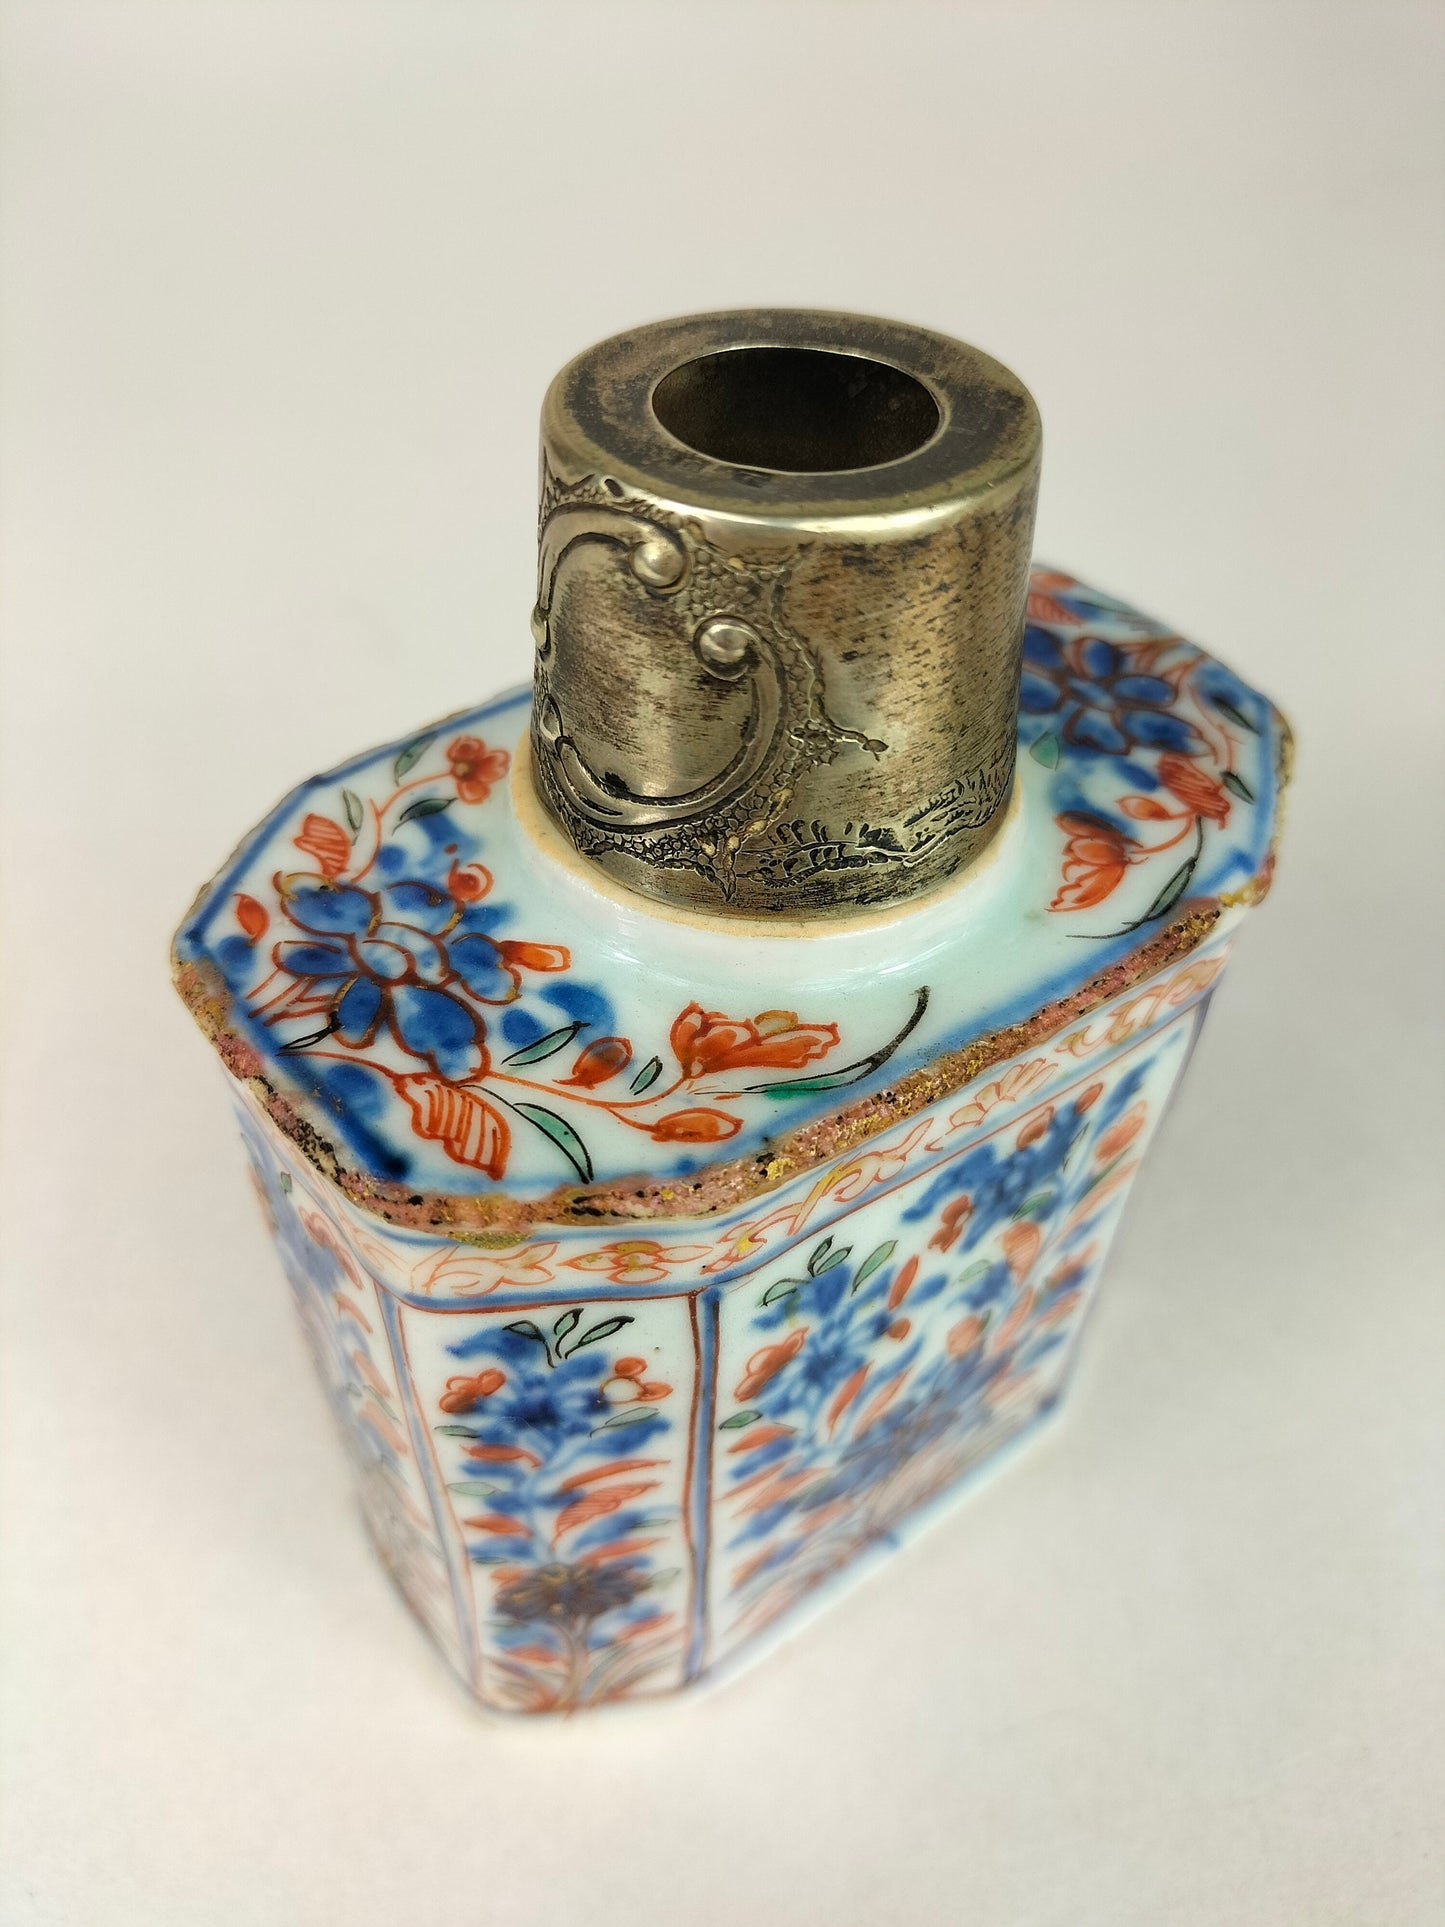 Antique Chinese imari tea can decorated with floral motifs // Qing Dynasty - 18th century - Kangxi